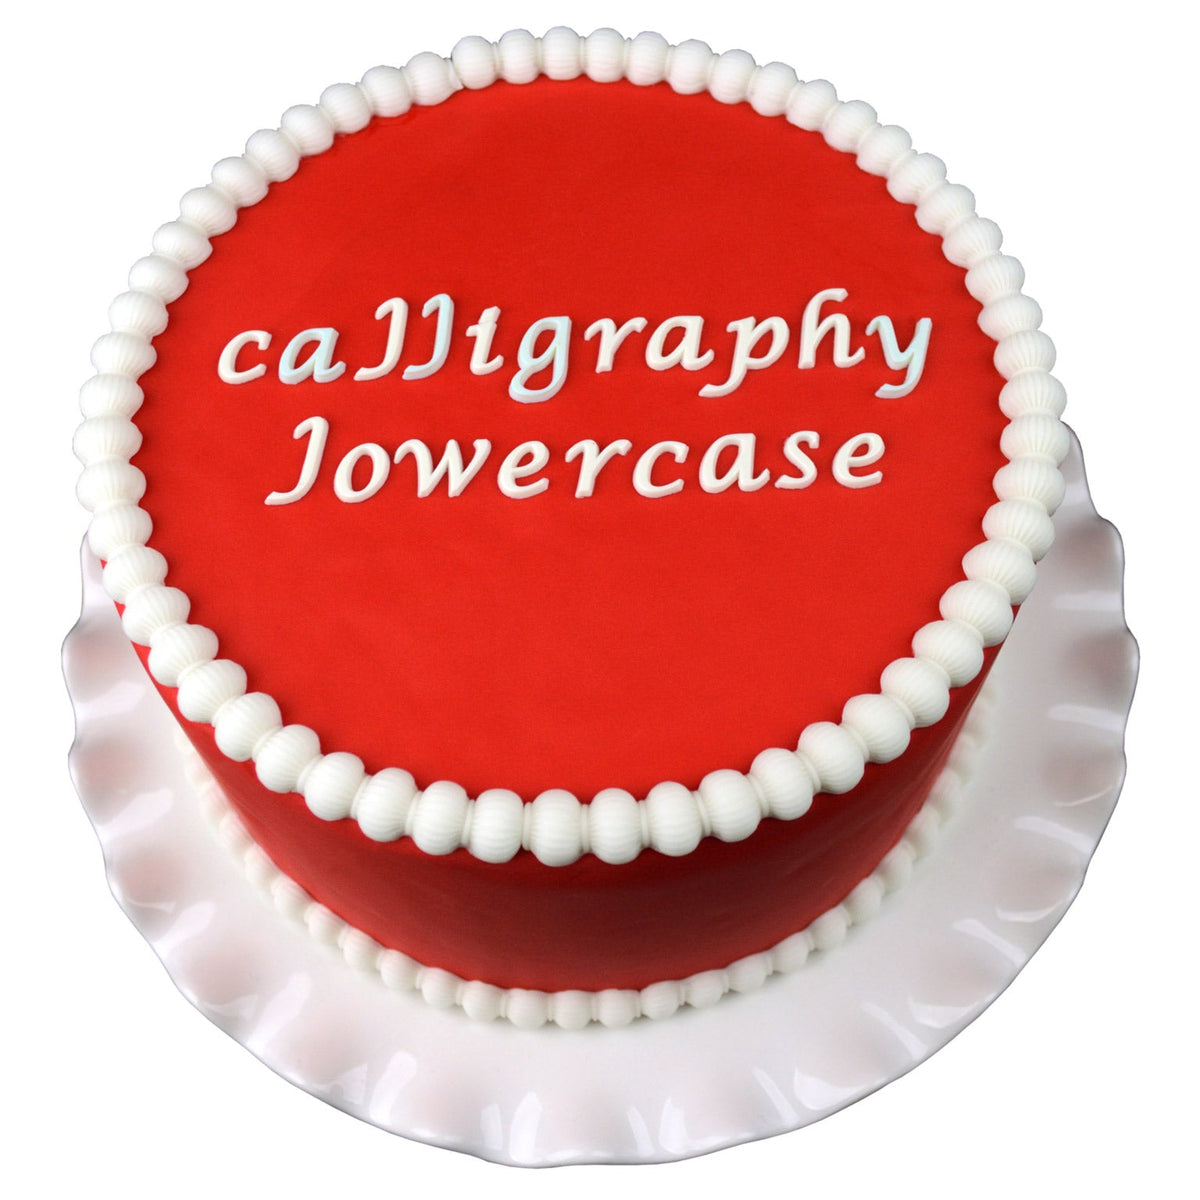 Decorated Cake using Calligraphy Lowercase Flexabet Food Safe Silicone Letter Maker by Marvelous Molds